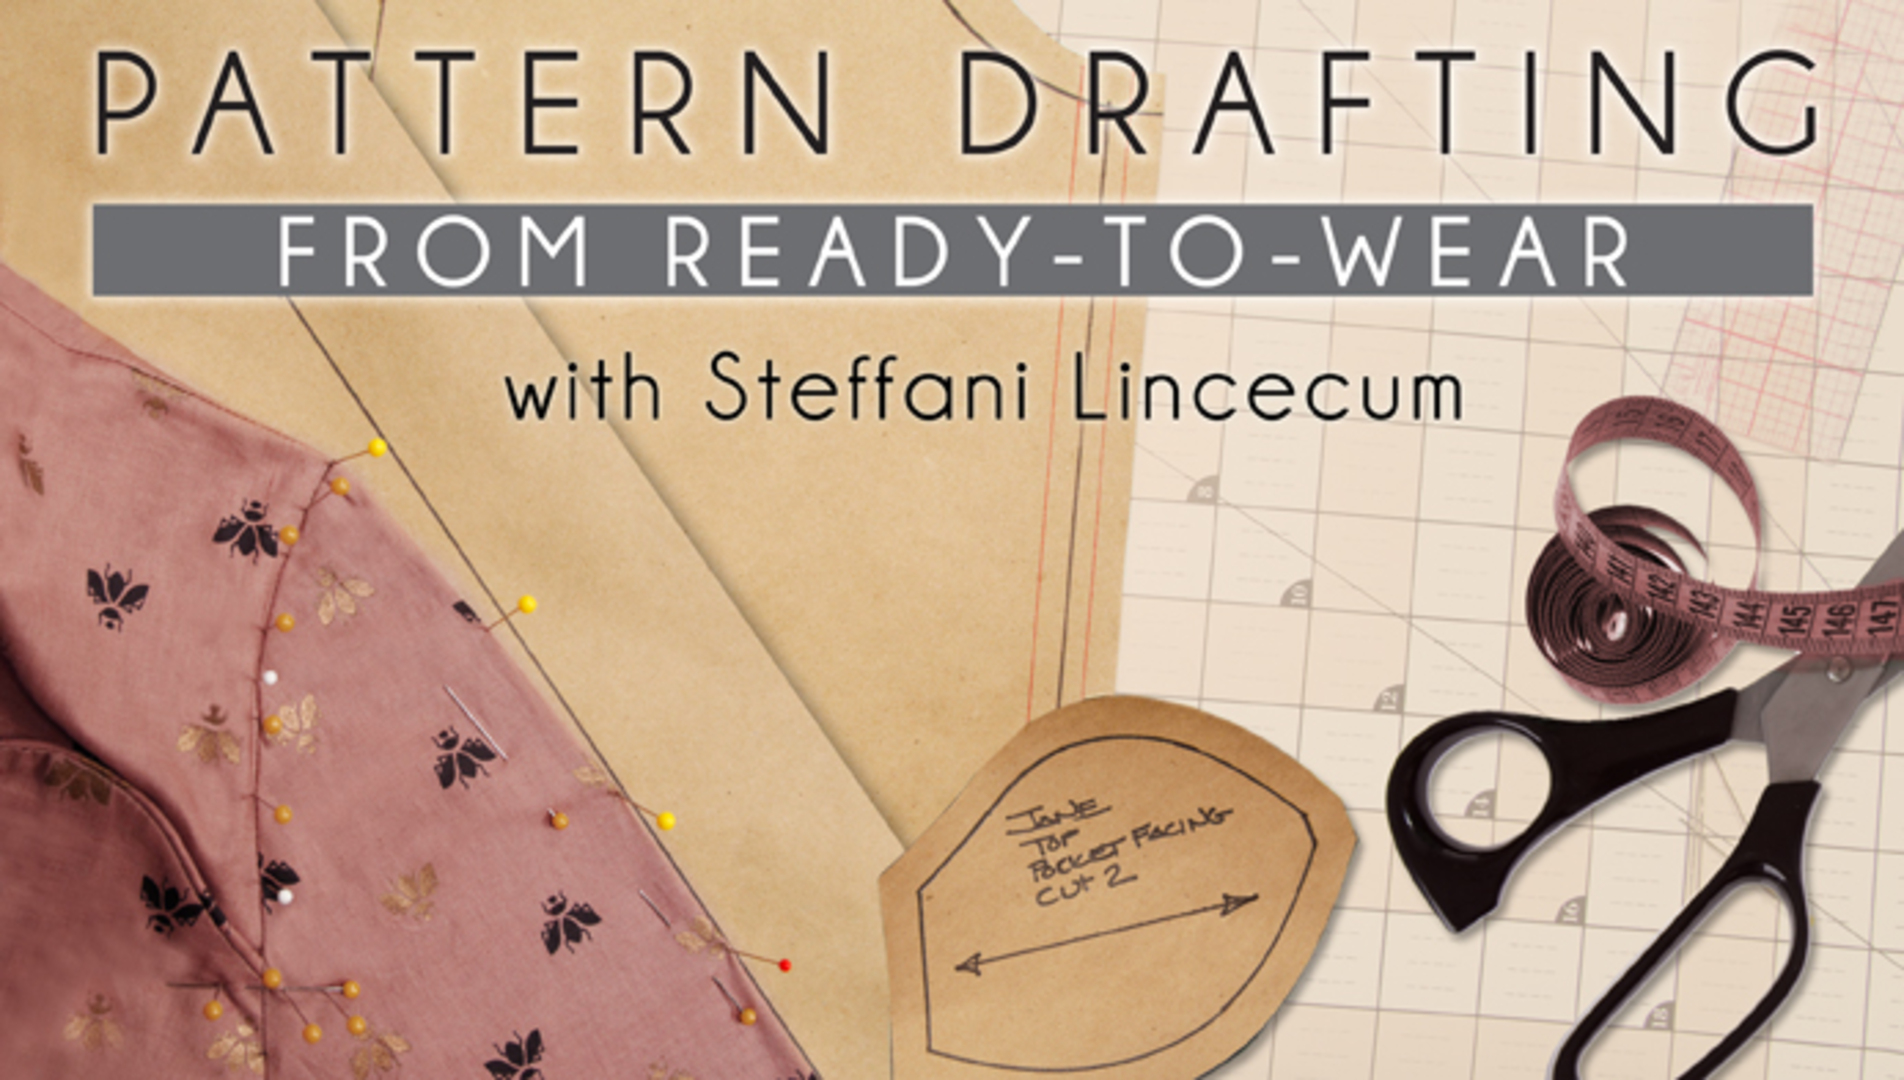 Pattern Drafting from Ready-to-Wear